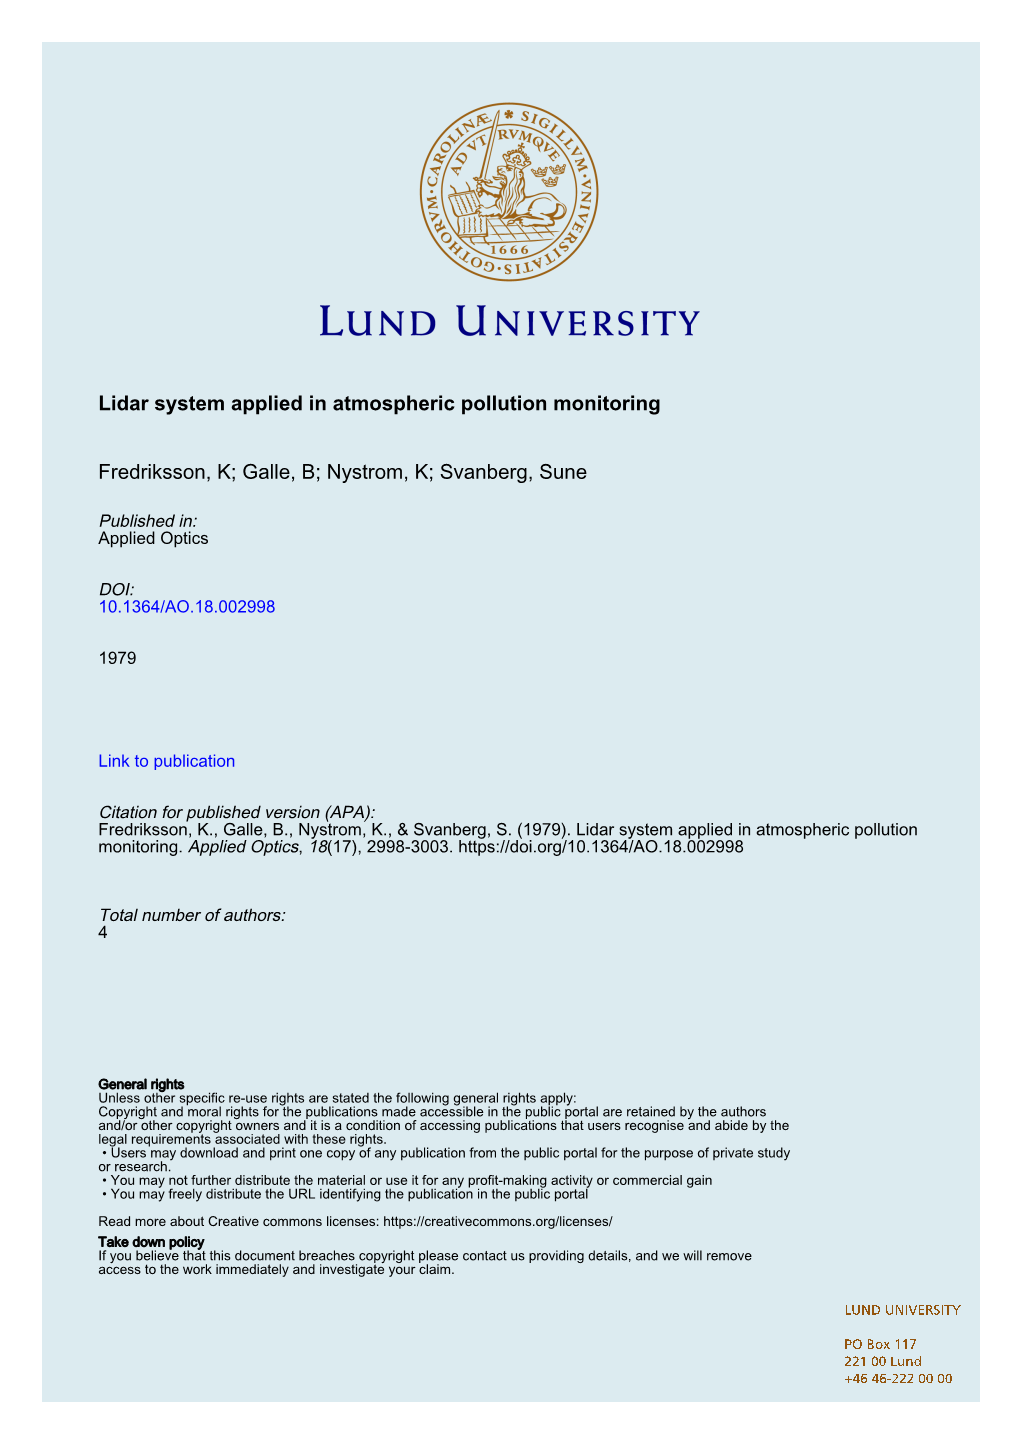 Lidar System Applied in Atmospheric Pollution Monitoring